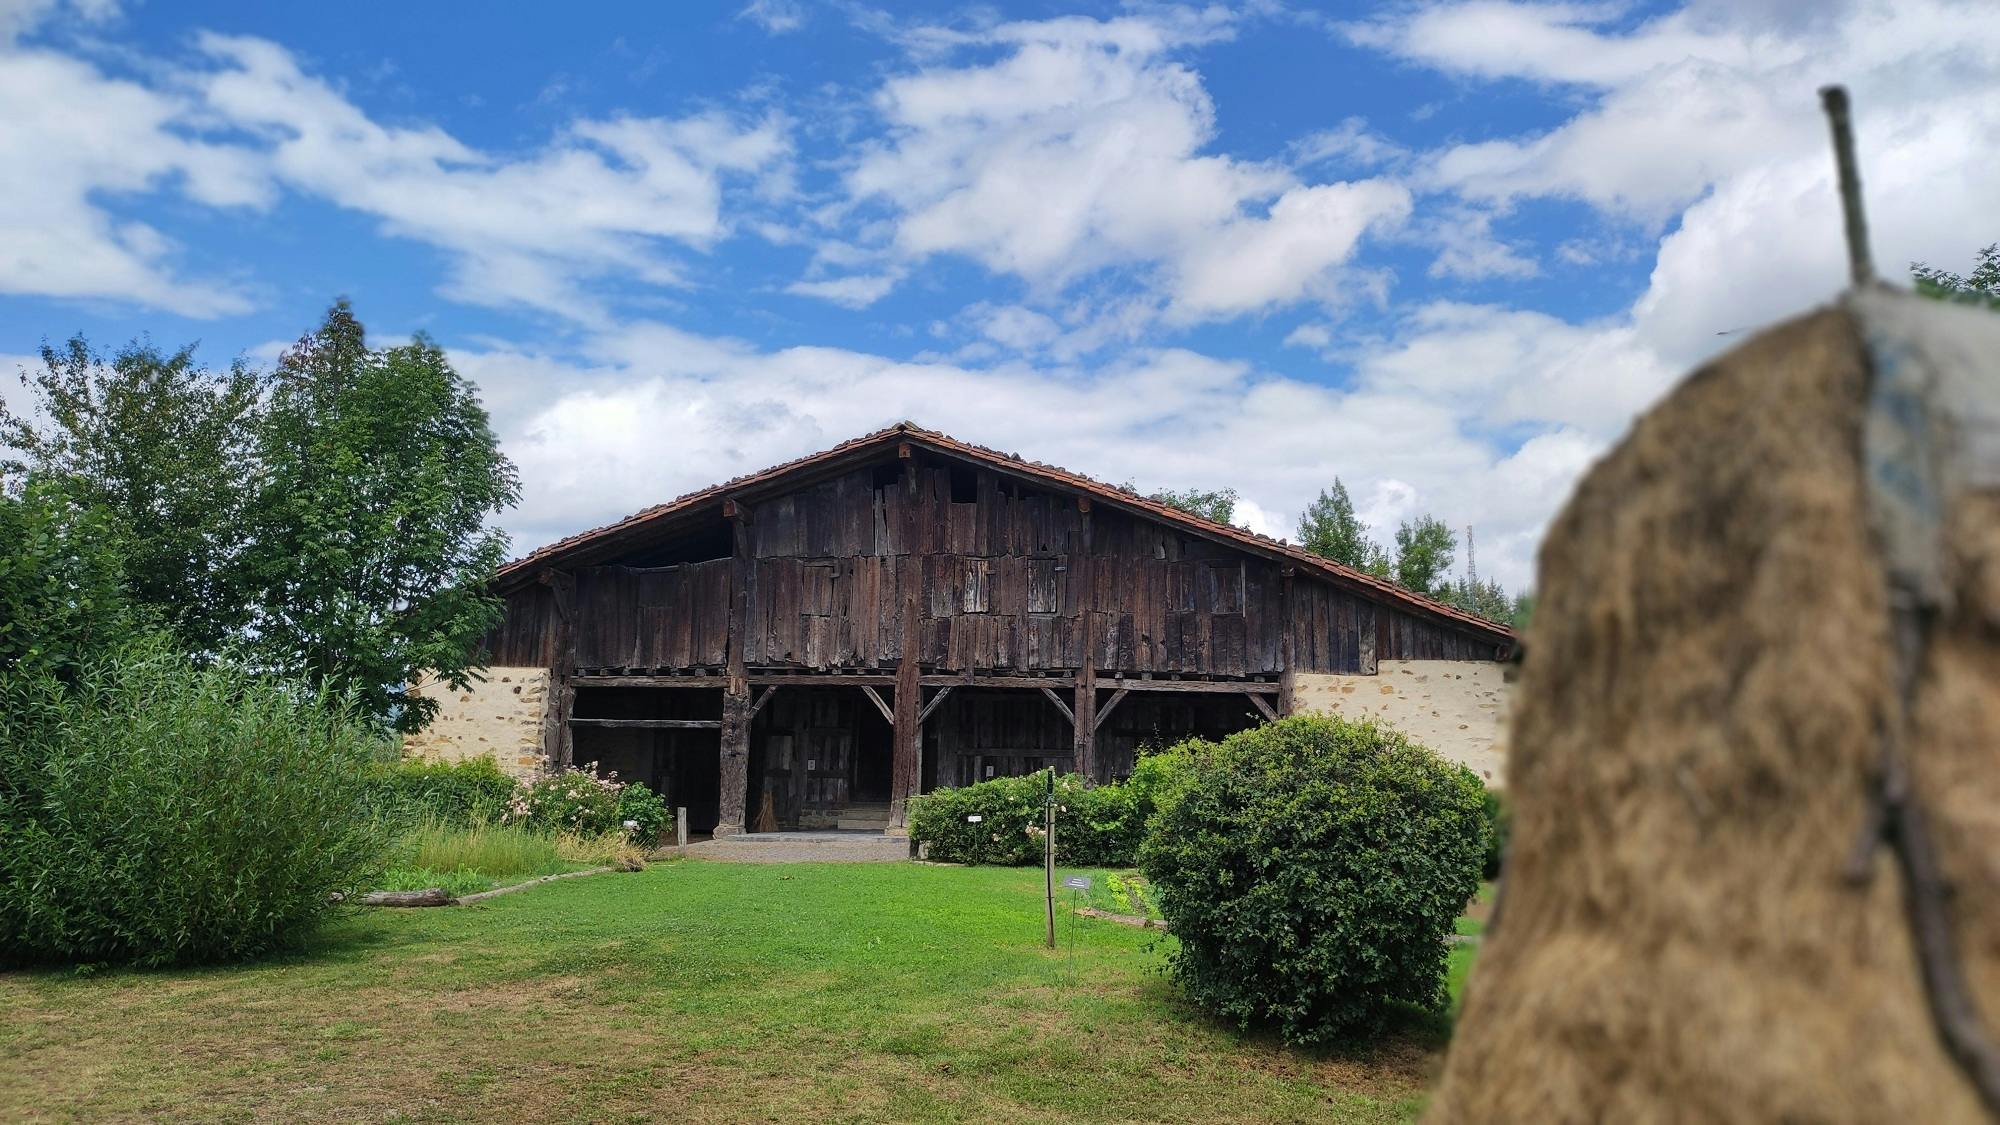 Full-day tour from Bilbao to discover the Basque rural culture